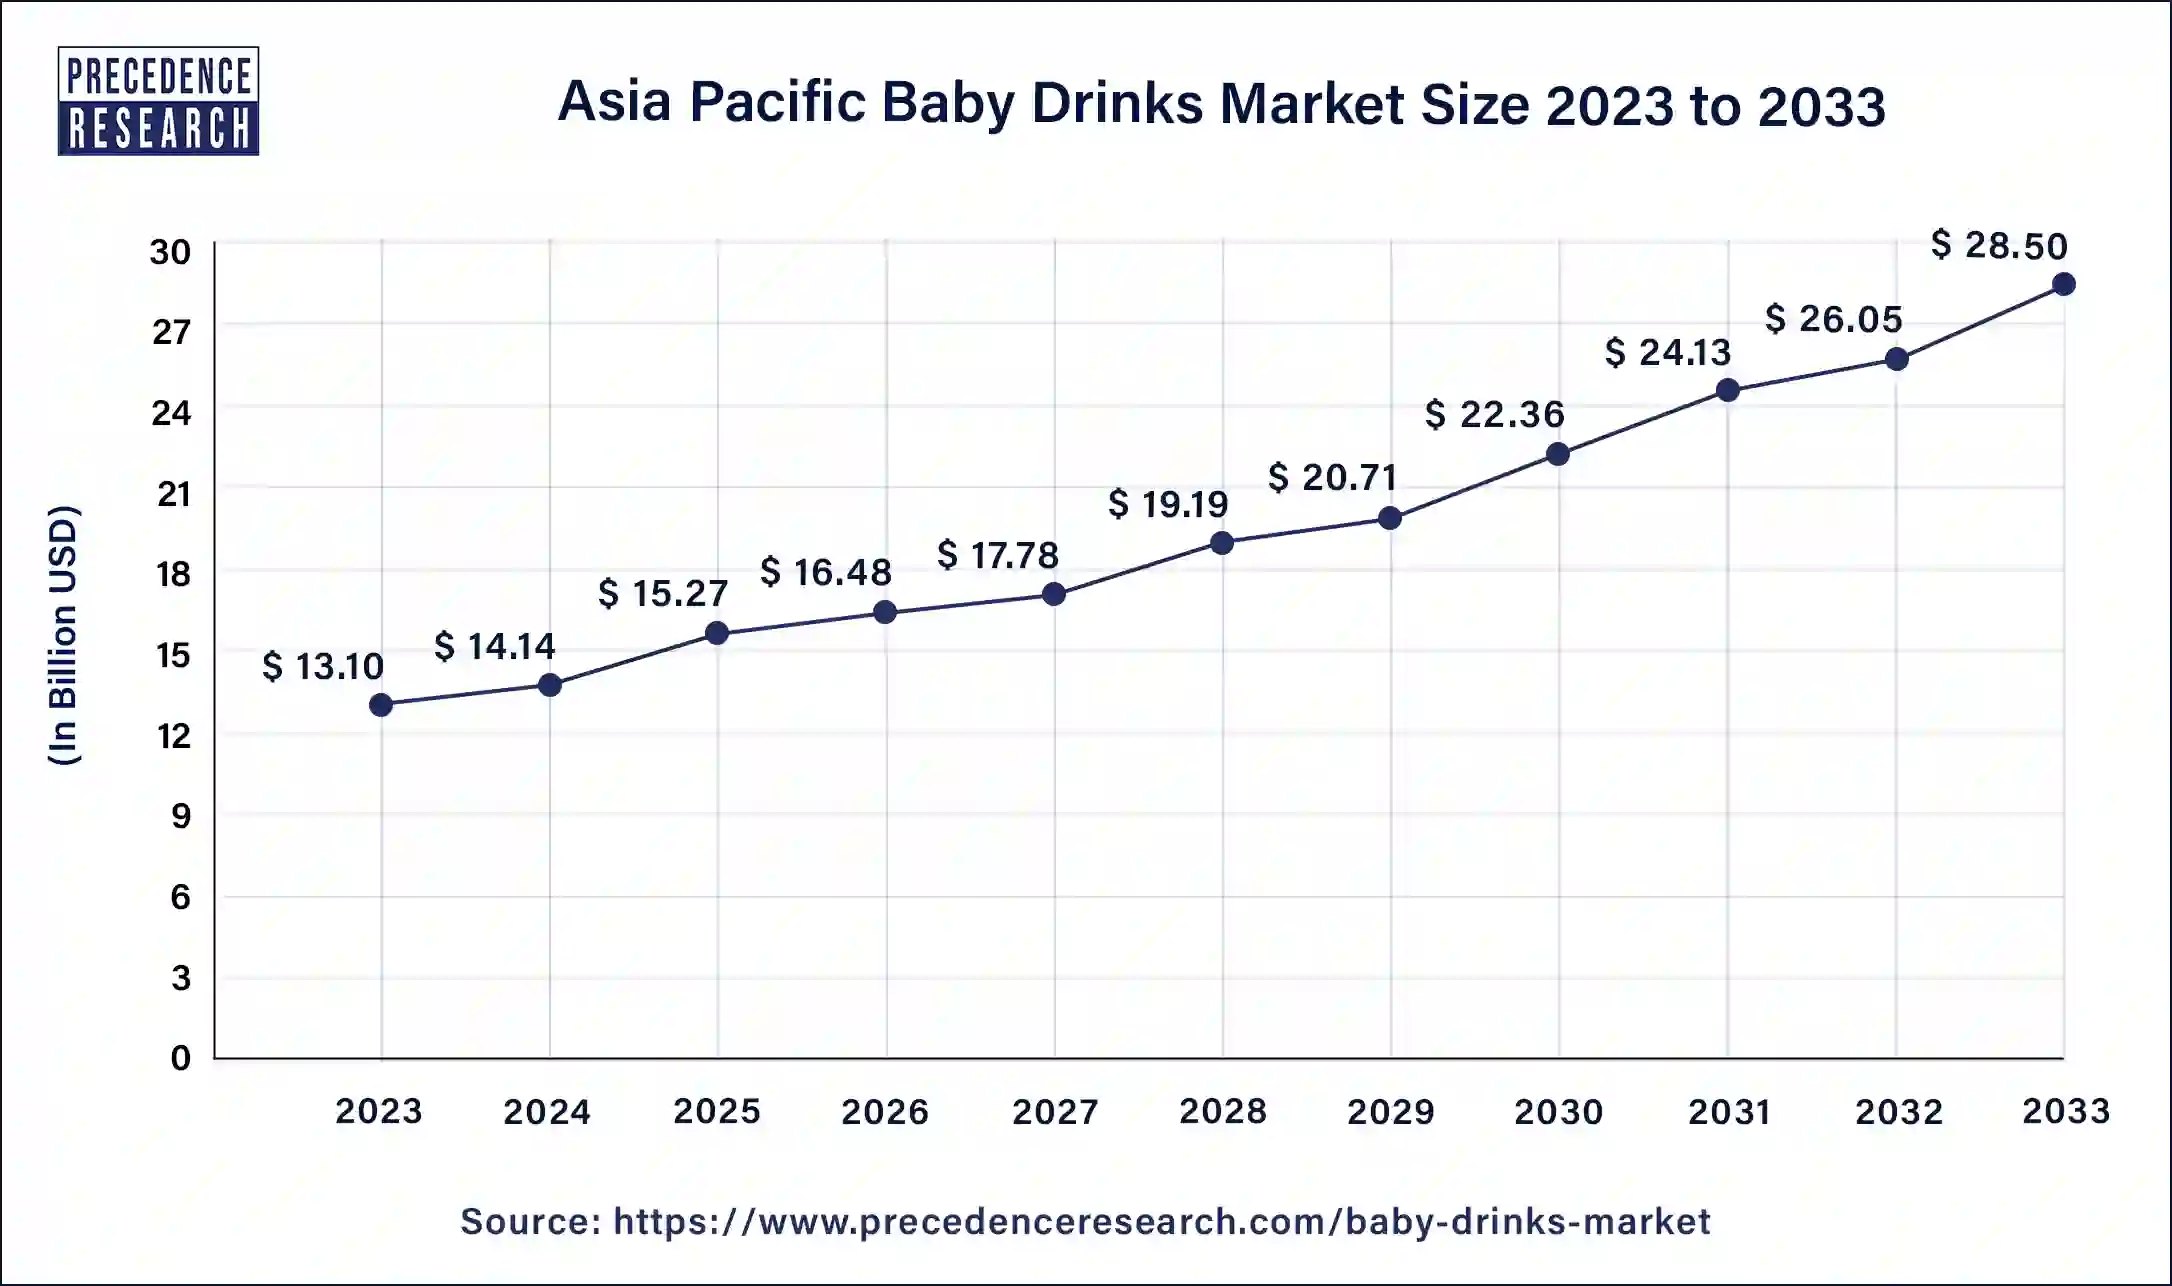 Asia Pacific Baby Drinks Market Size 2024 to 2033